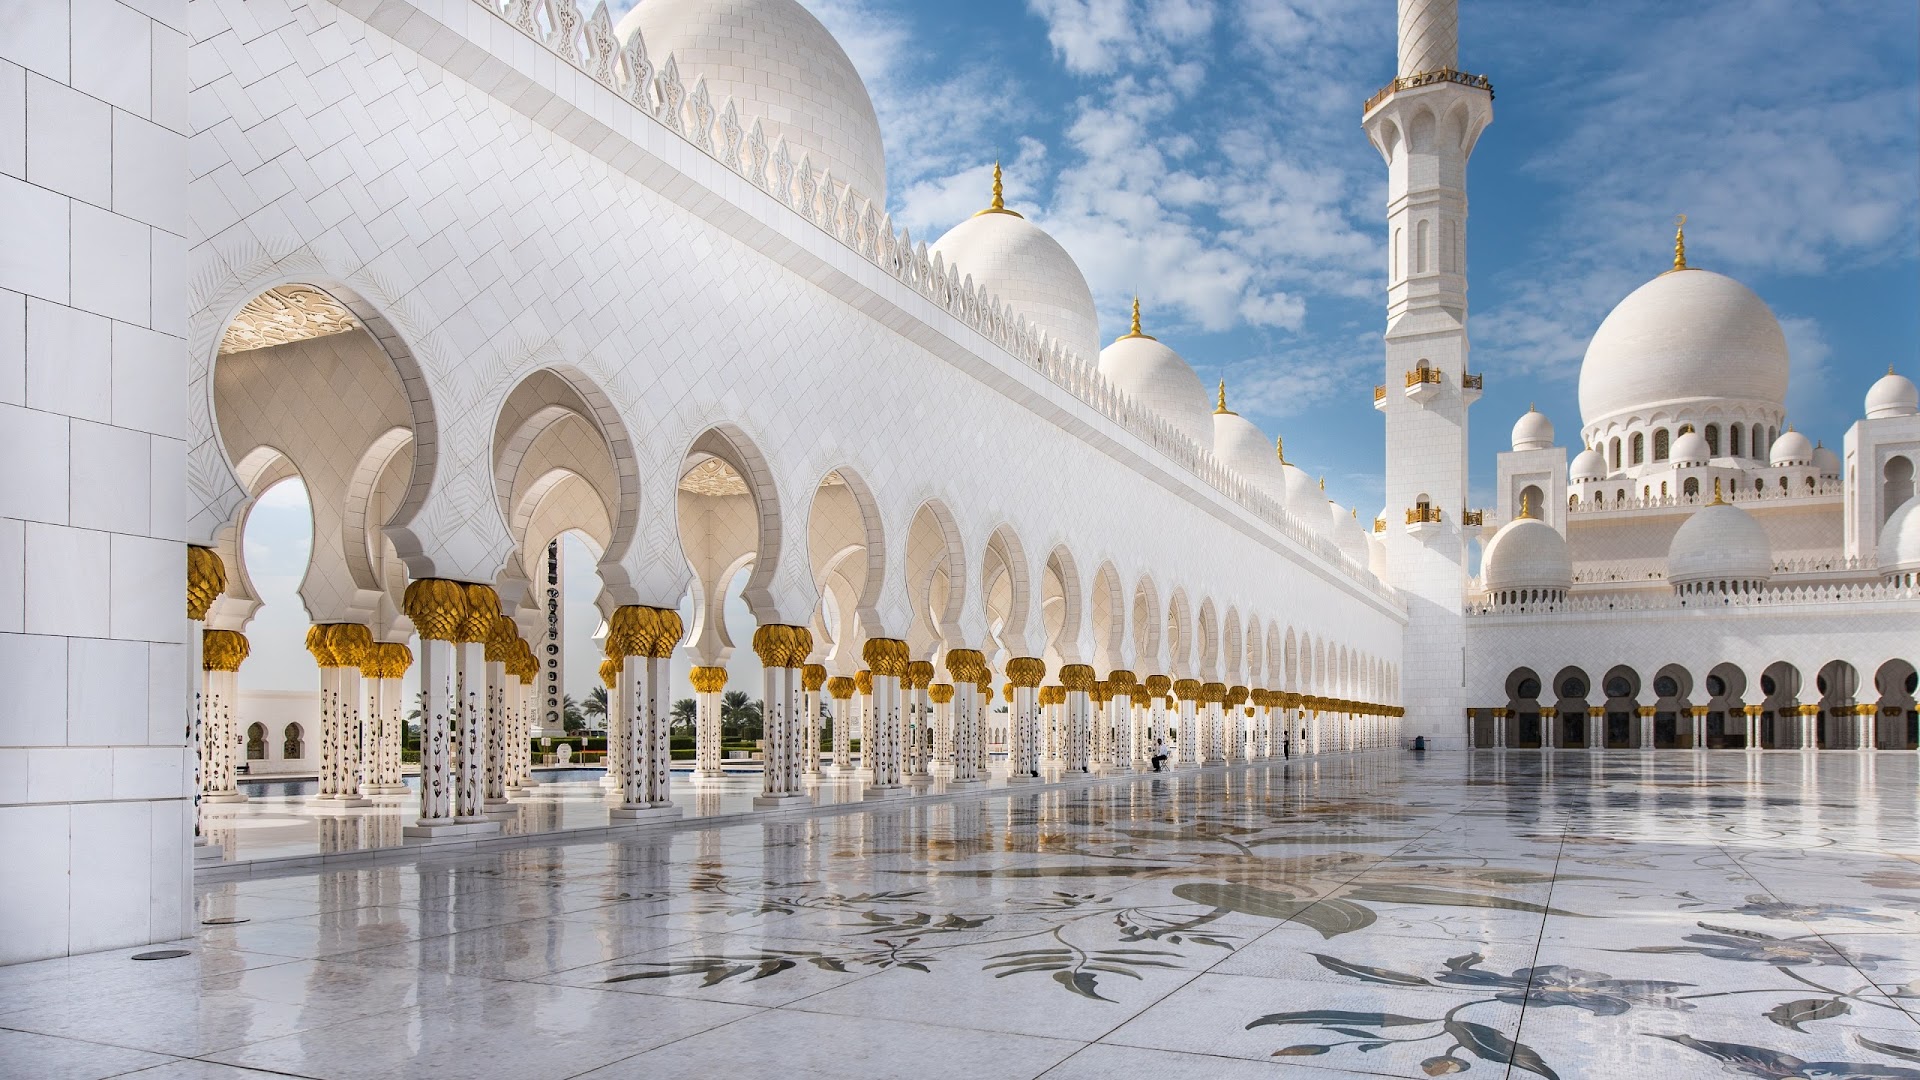 Sheikh Zayed Grand Mosque Backgrounds, Compatible - PC, Mobile, Gadgets| 1920x1080 px